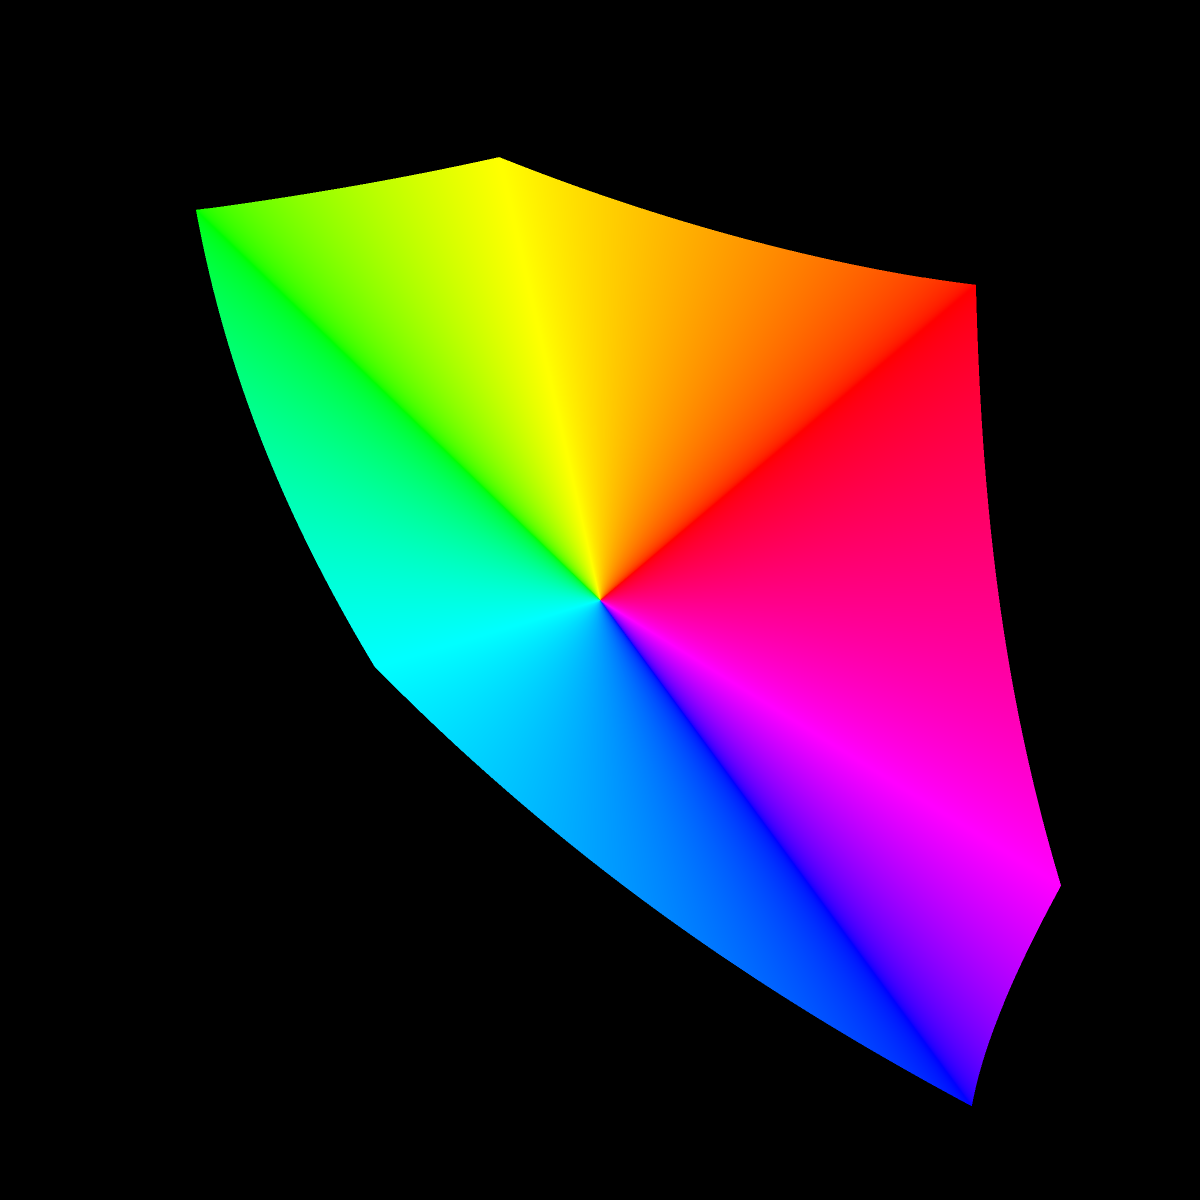 saturated RGB colors projected to the a-b plane of the CIE Lab color space